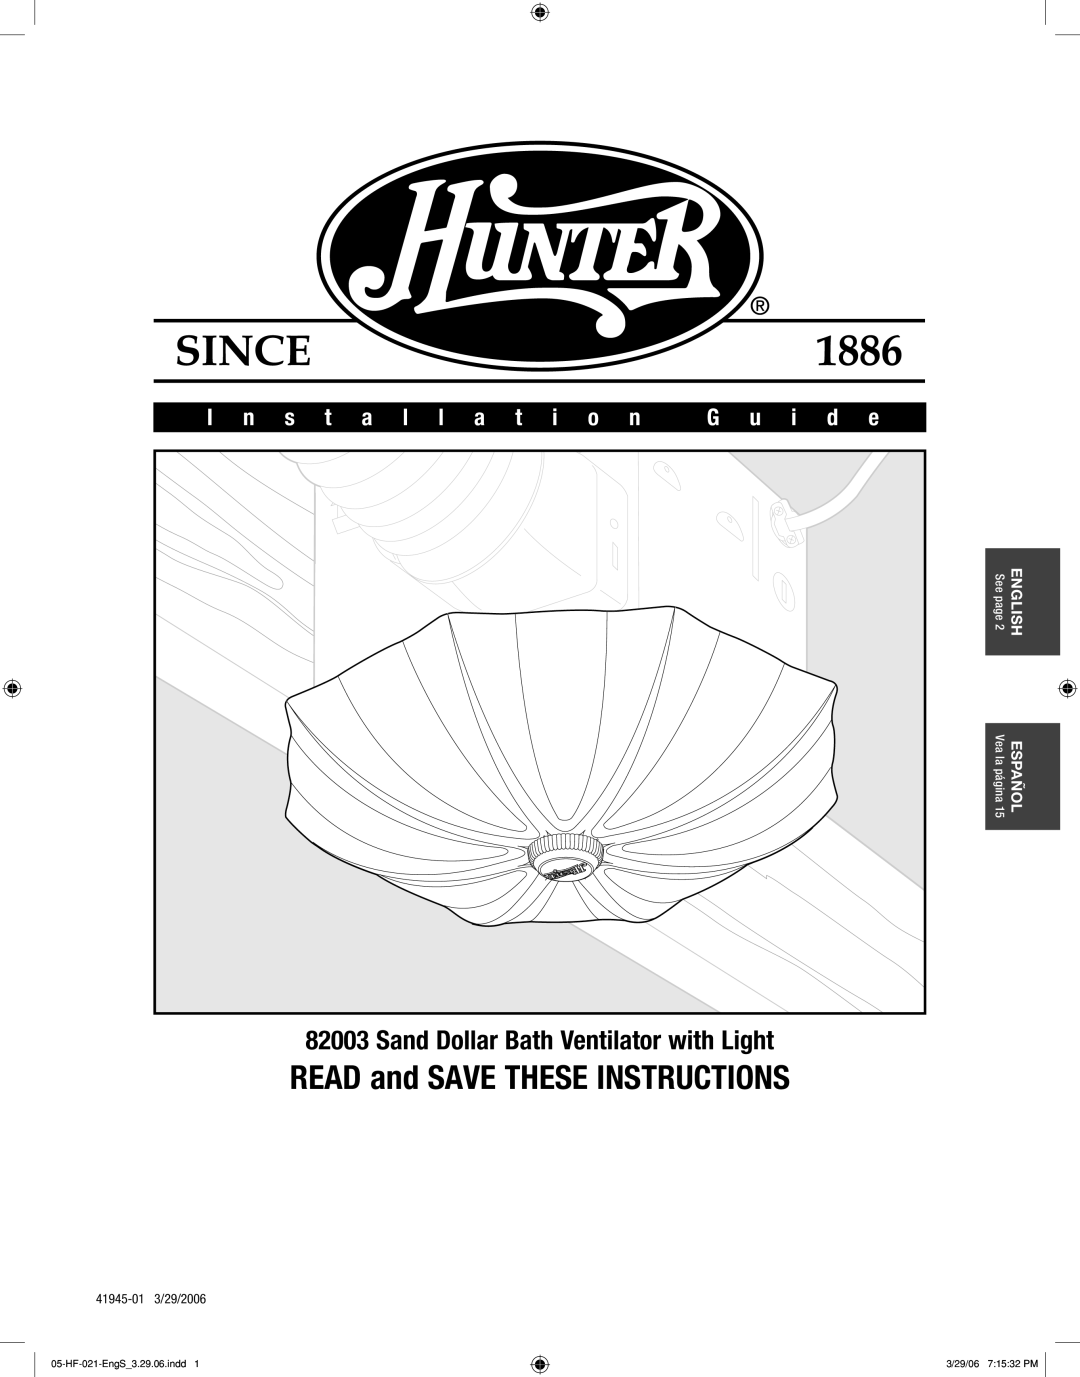 Hunter Fan 82003 manual READ and SAVE THESE INSTRUCTIONS, Sand Dollar Bath Ventilator with Light, I n s t a l l a t i o n 